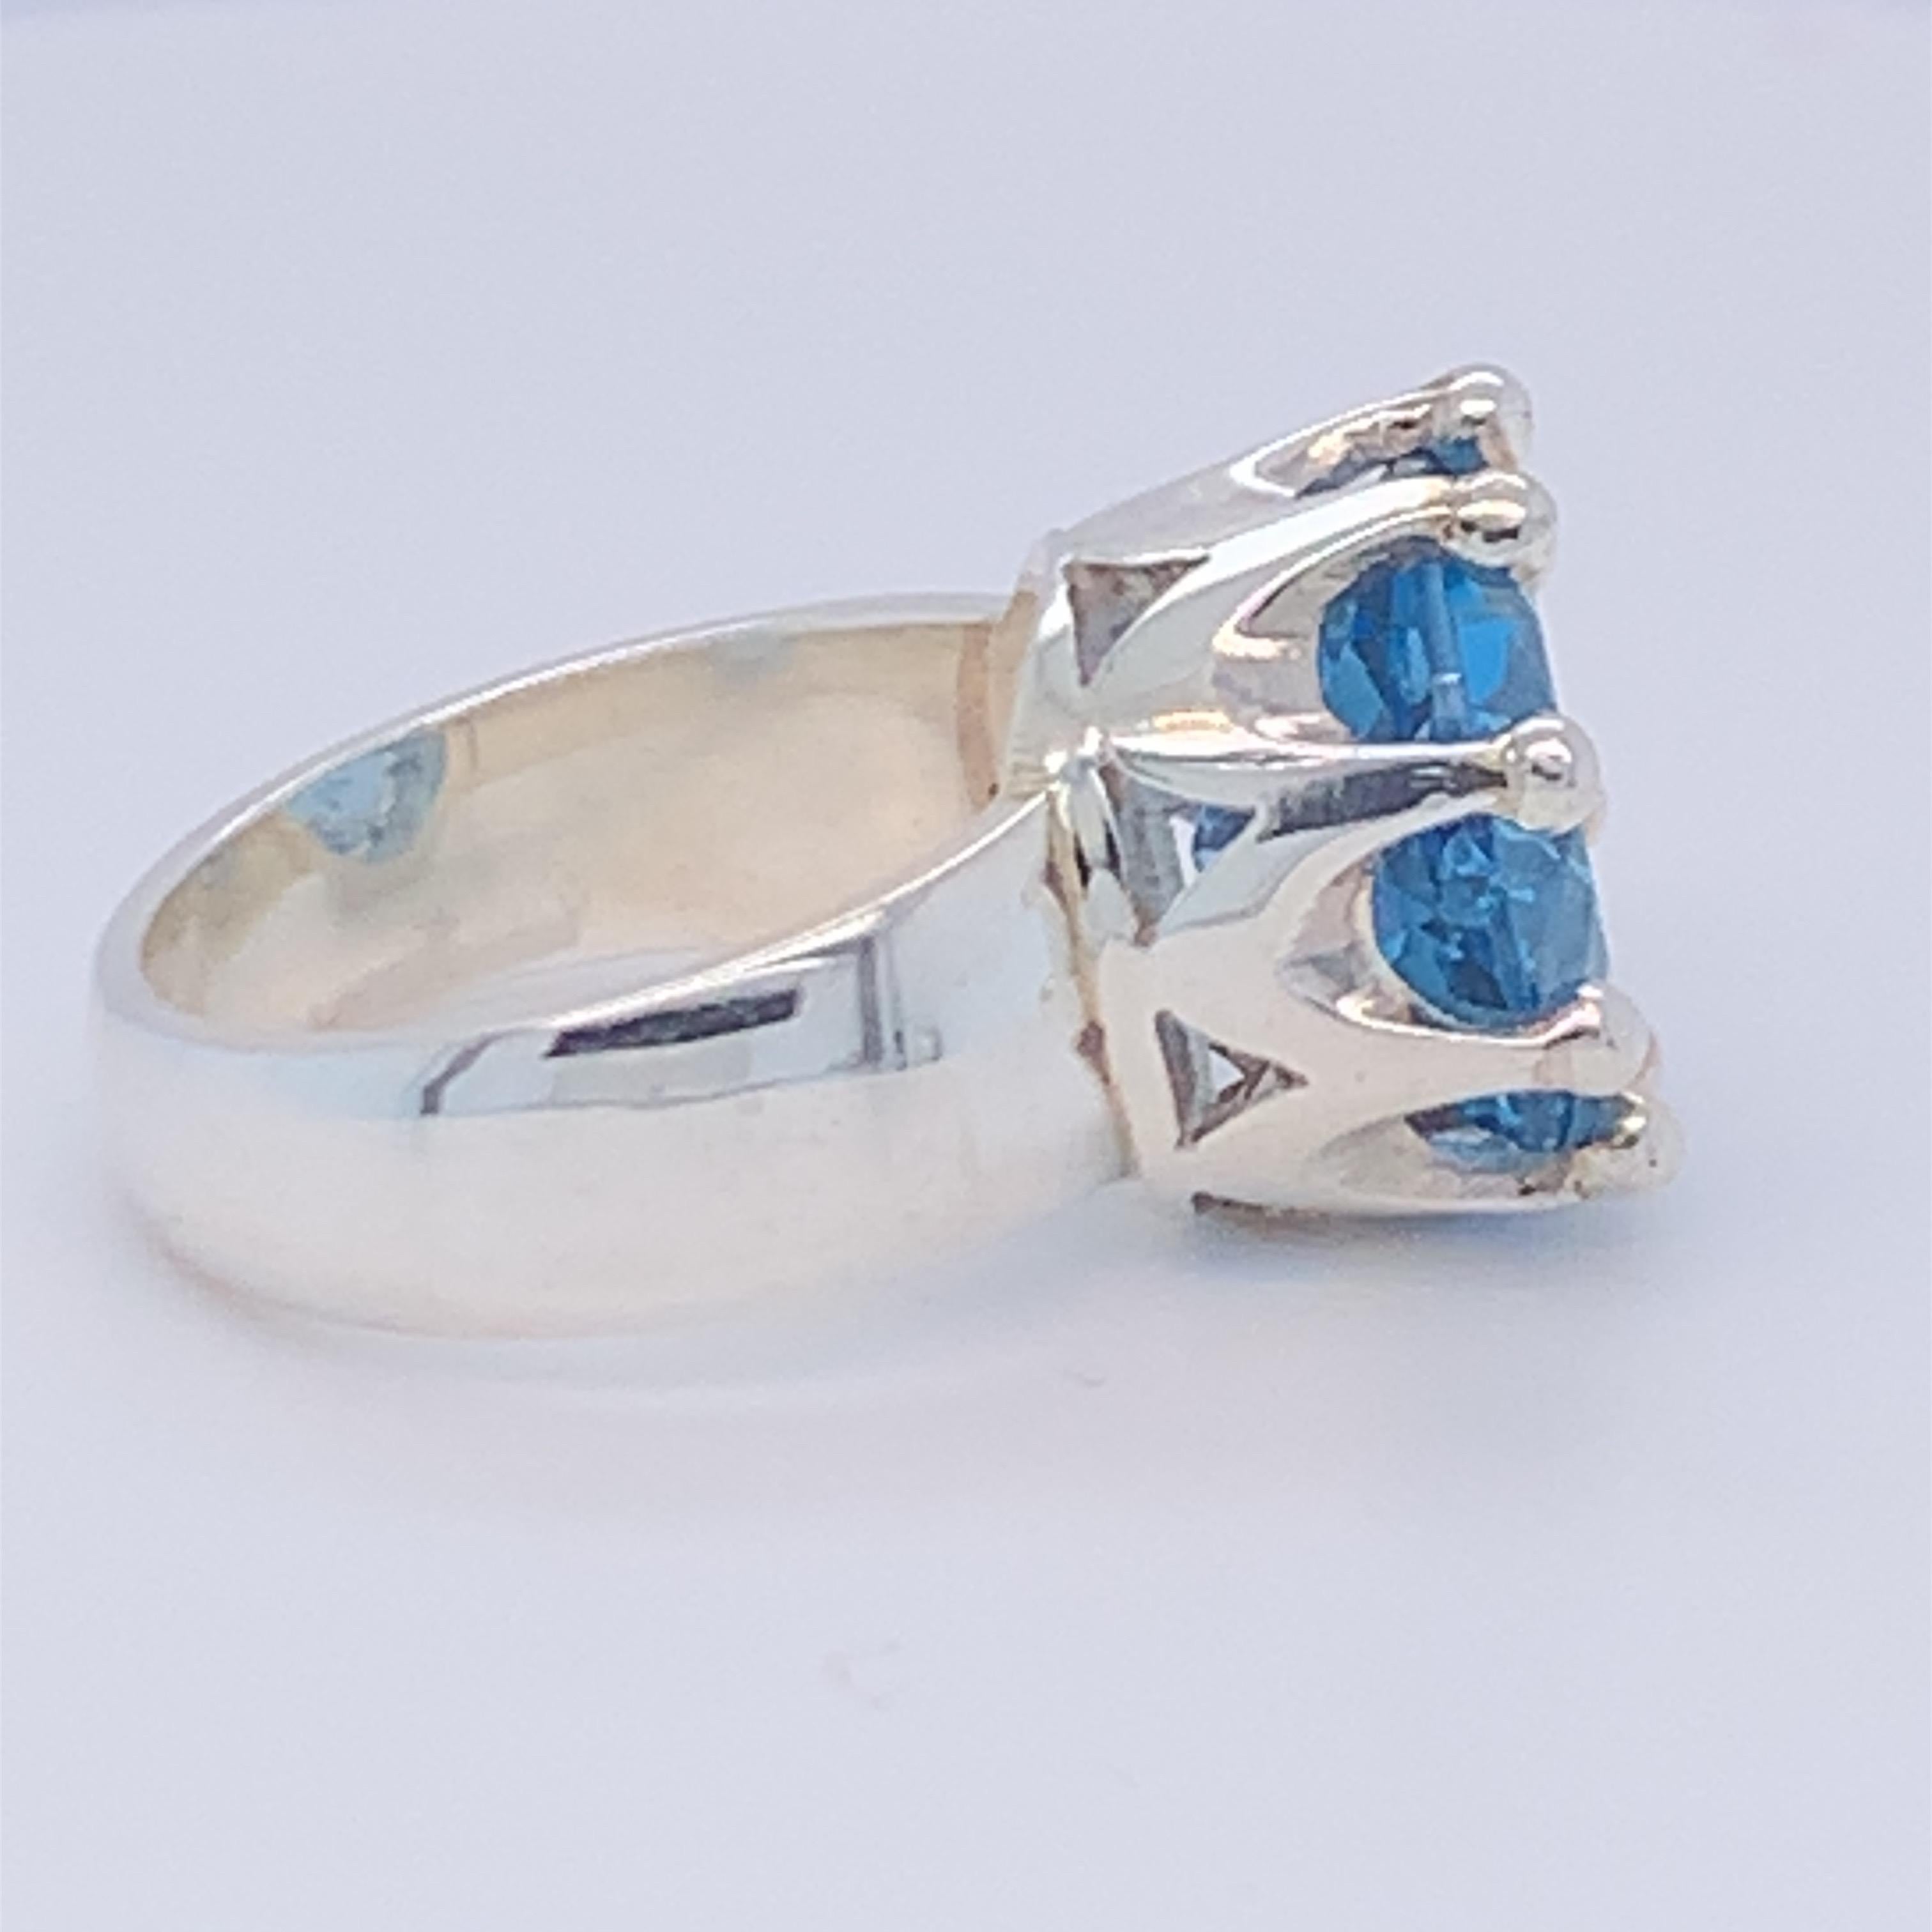 This magnificent crown design ring boasts round blue topaz. This elegant and stunning piece is suitable for day and evening wear. Set in sterling silver and hand made by master craftsman.

Blue topaz: 10.00ct (approx)
Size: 7.25